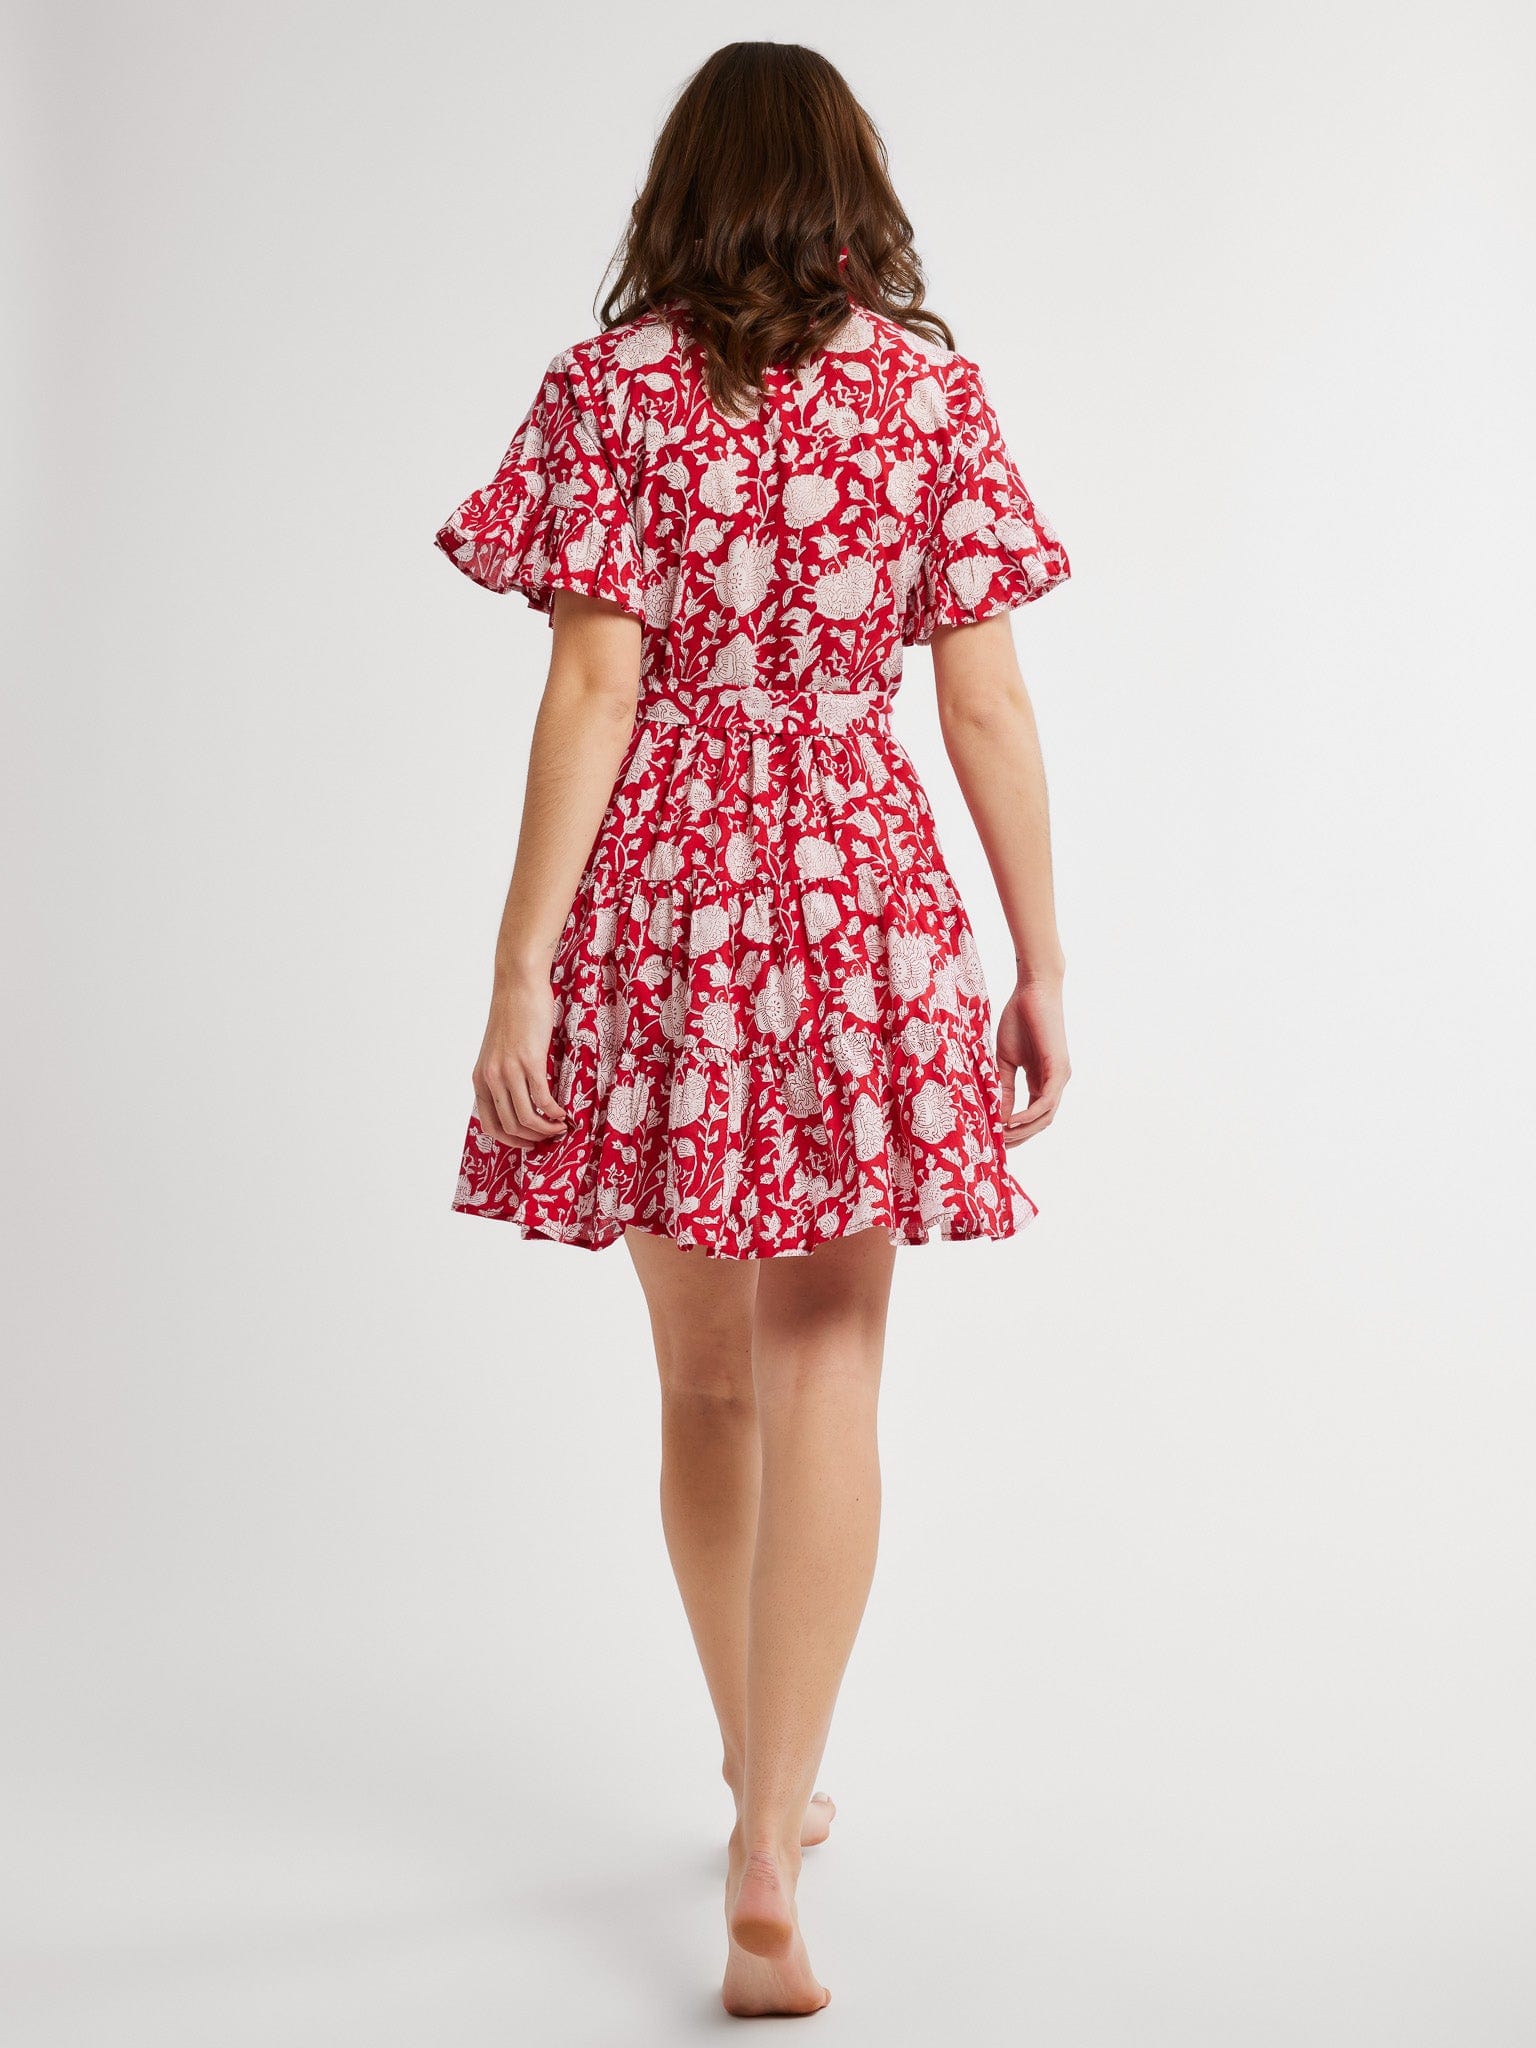 MILLE Clothing Violetta Dress in Red Zinnia